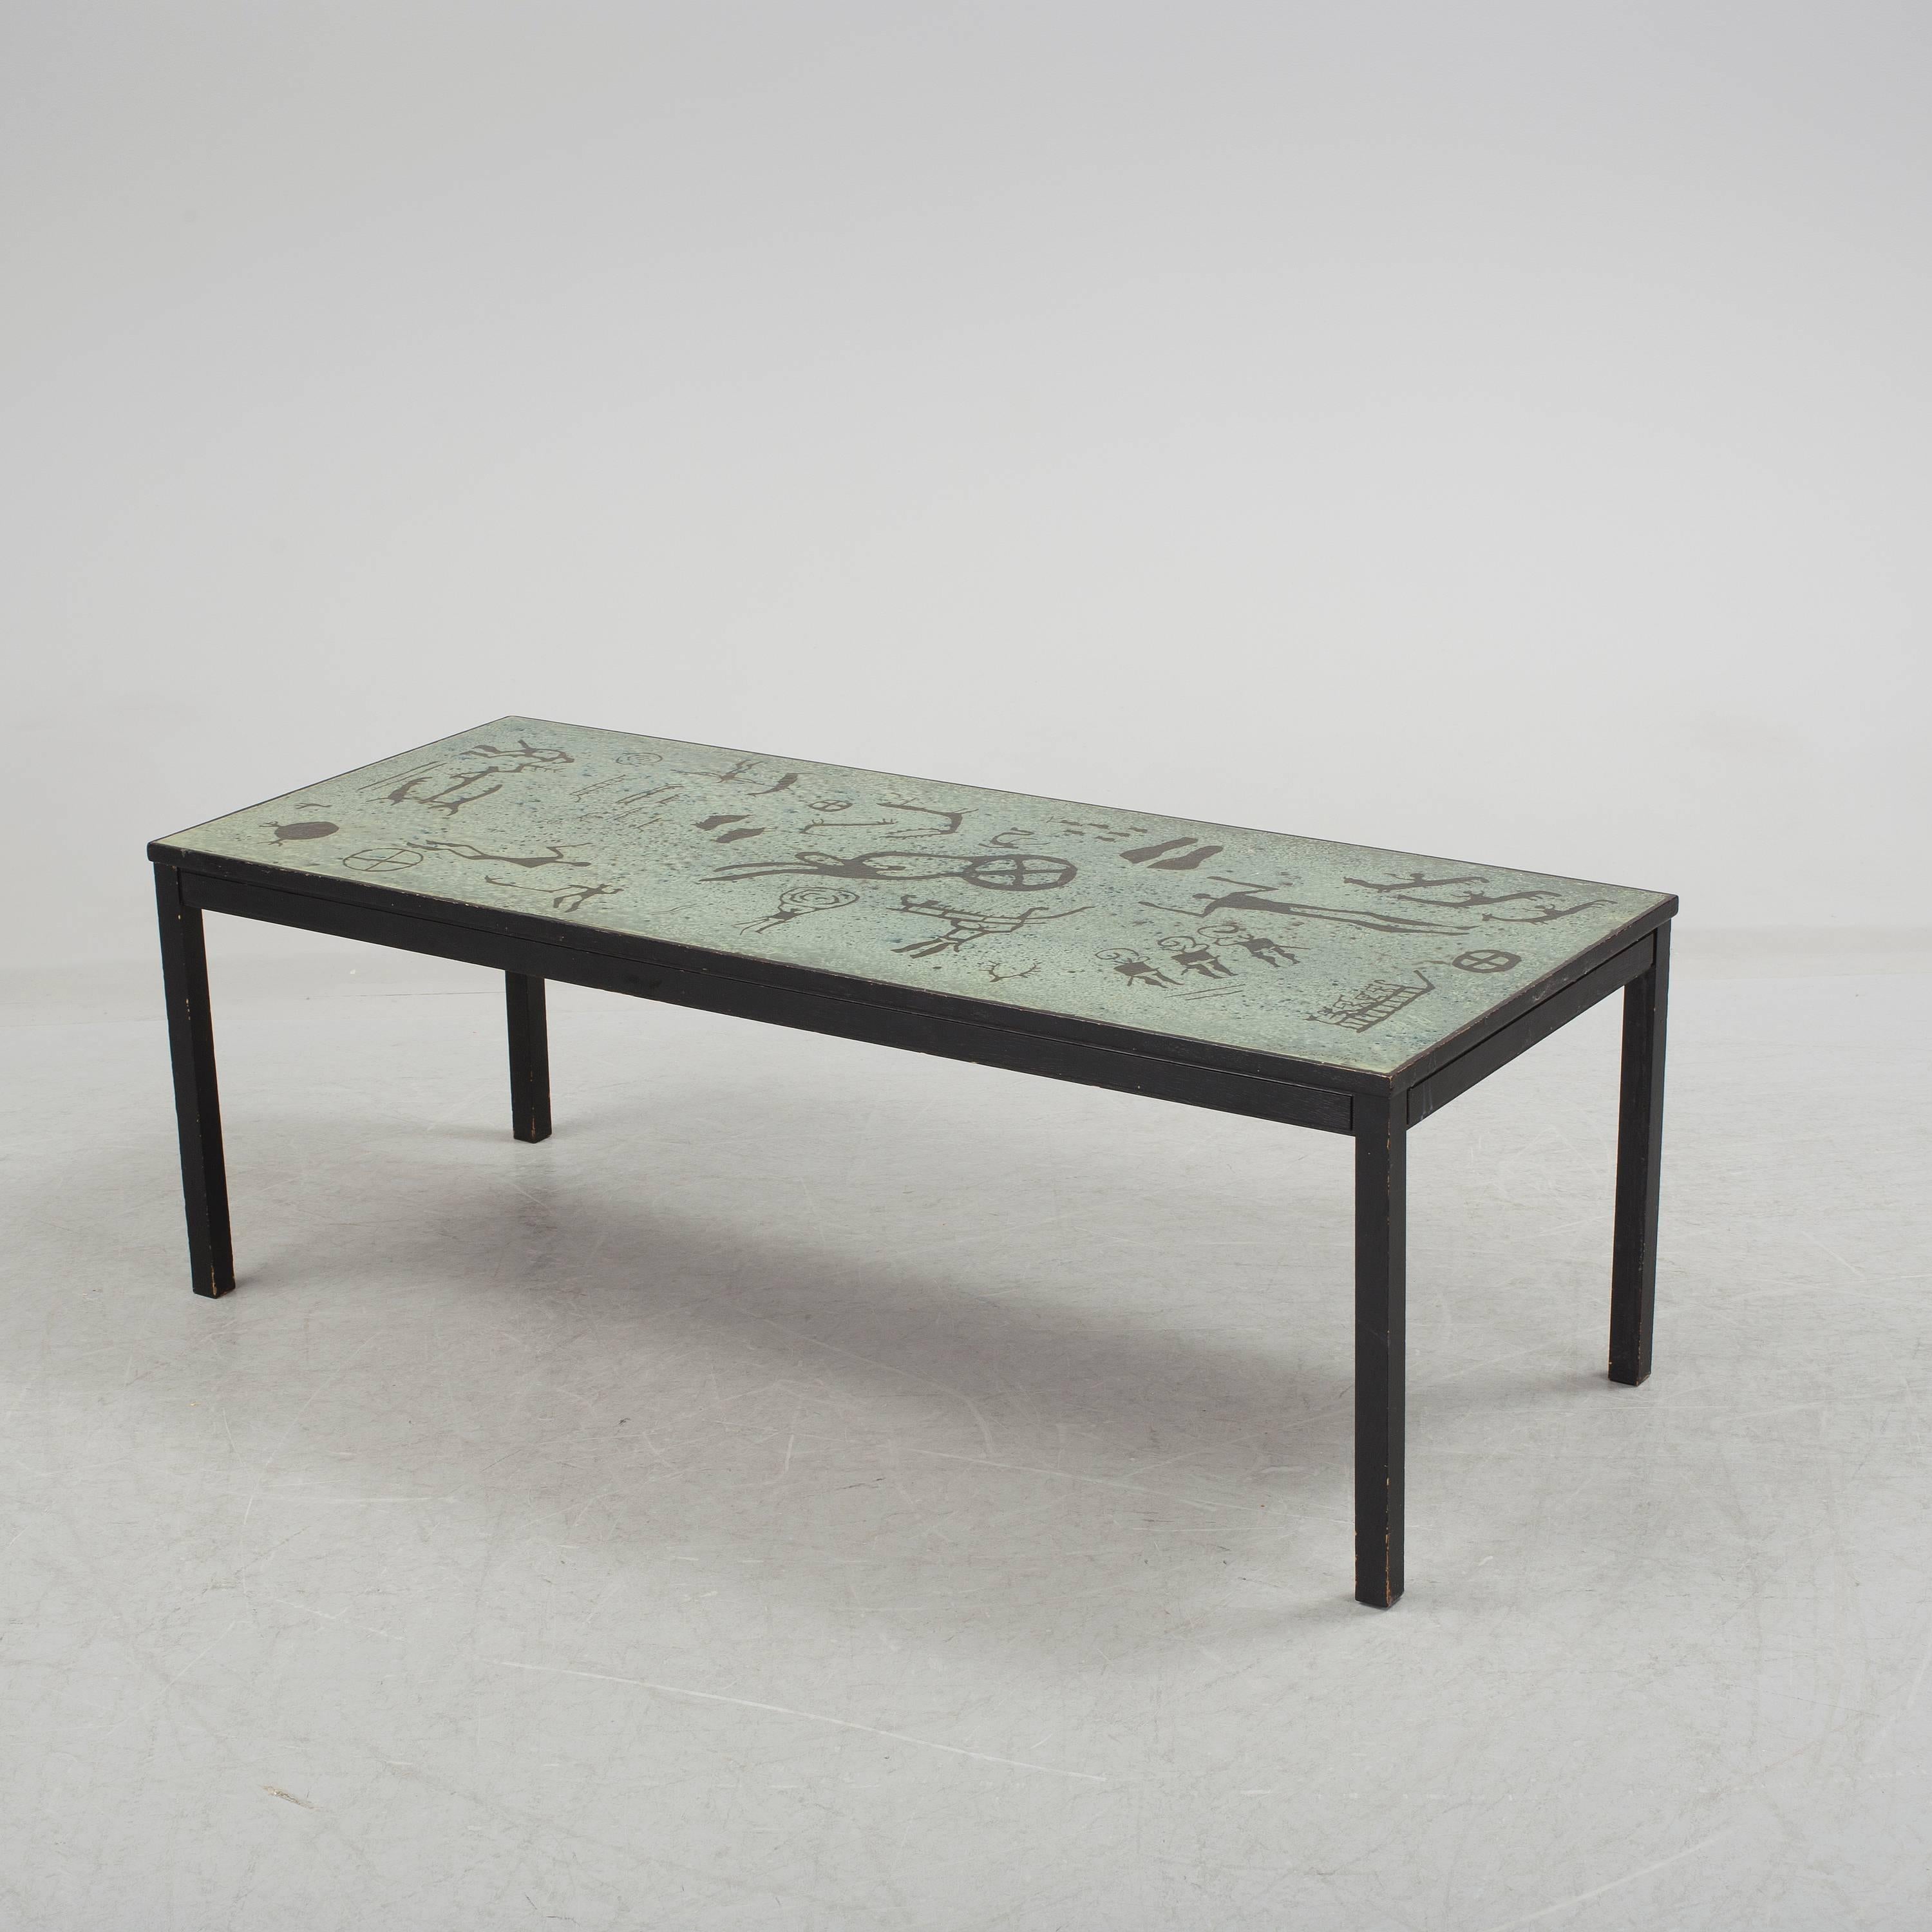 Beautiful coffee table by David Rosen and Algot Torneman.
Green enameled glass with black lacquered wood structure.
Manufactured for Nordiska Kompaniet,
Sweden, circa 1950.